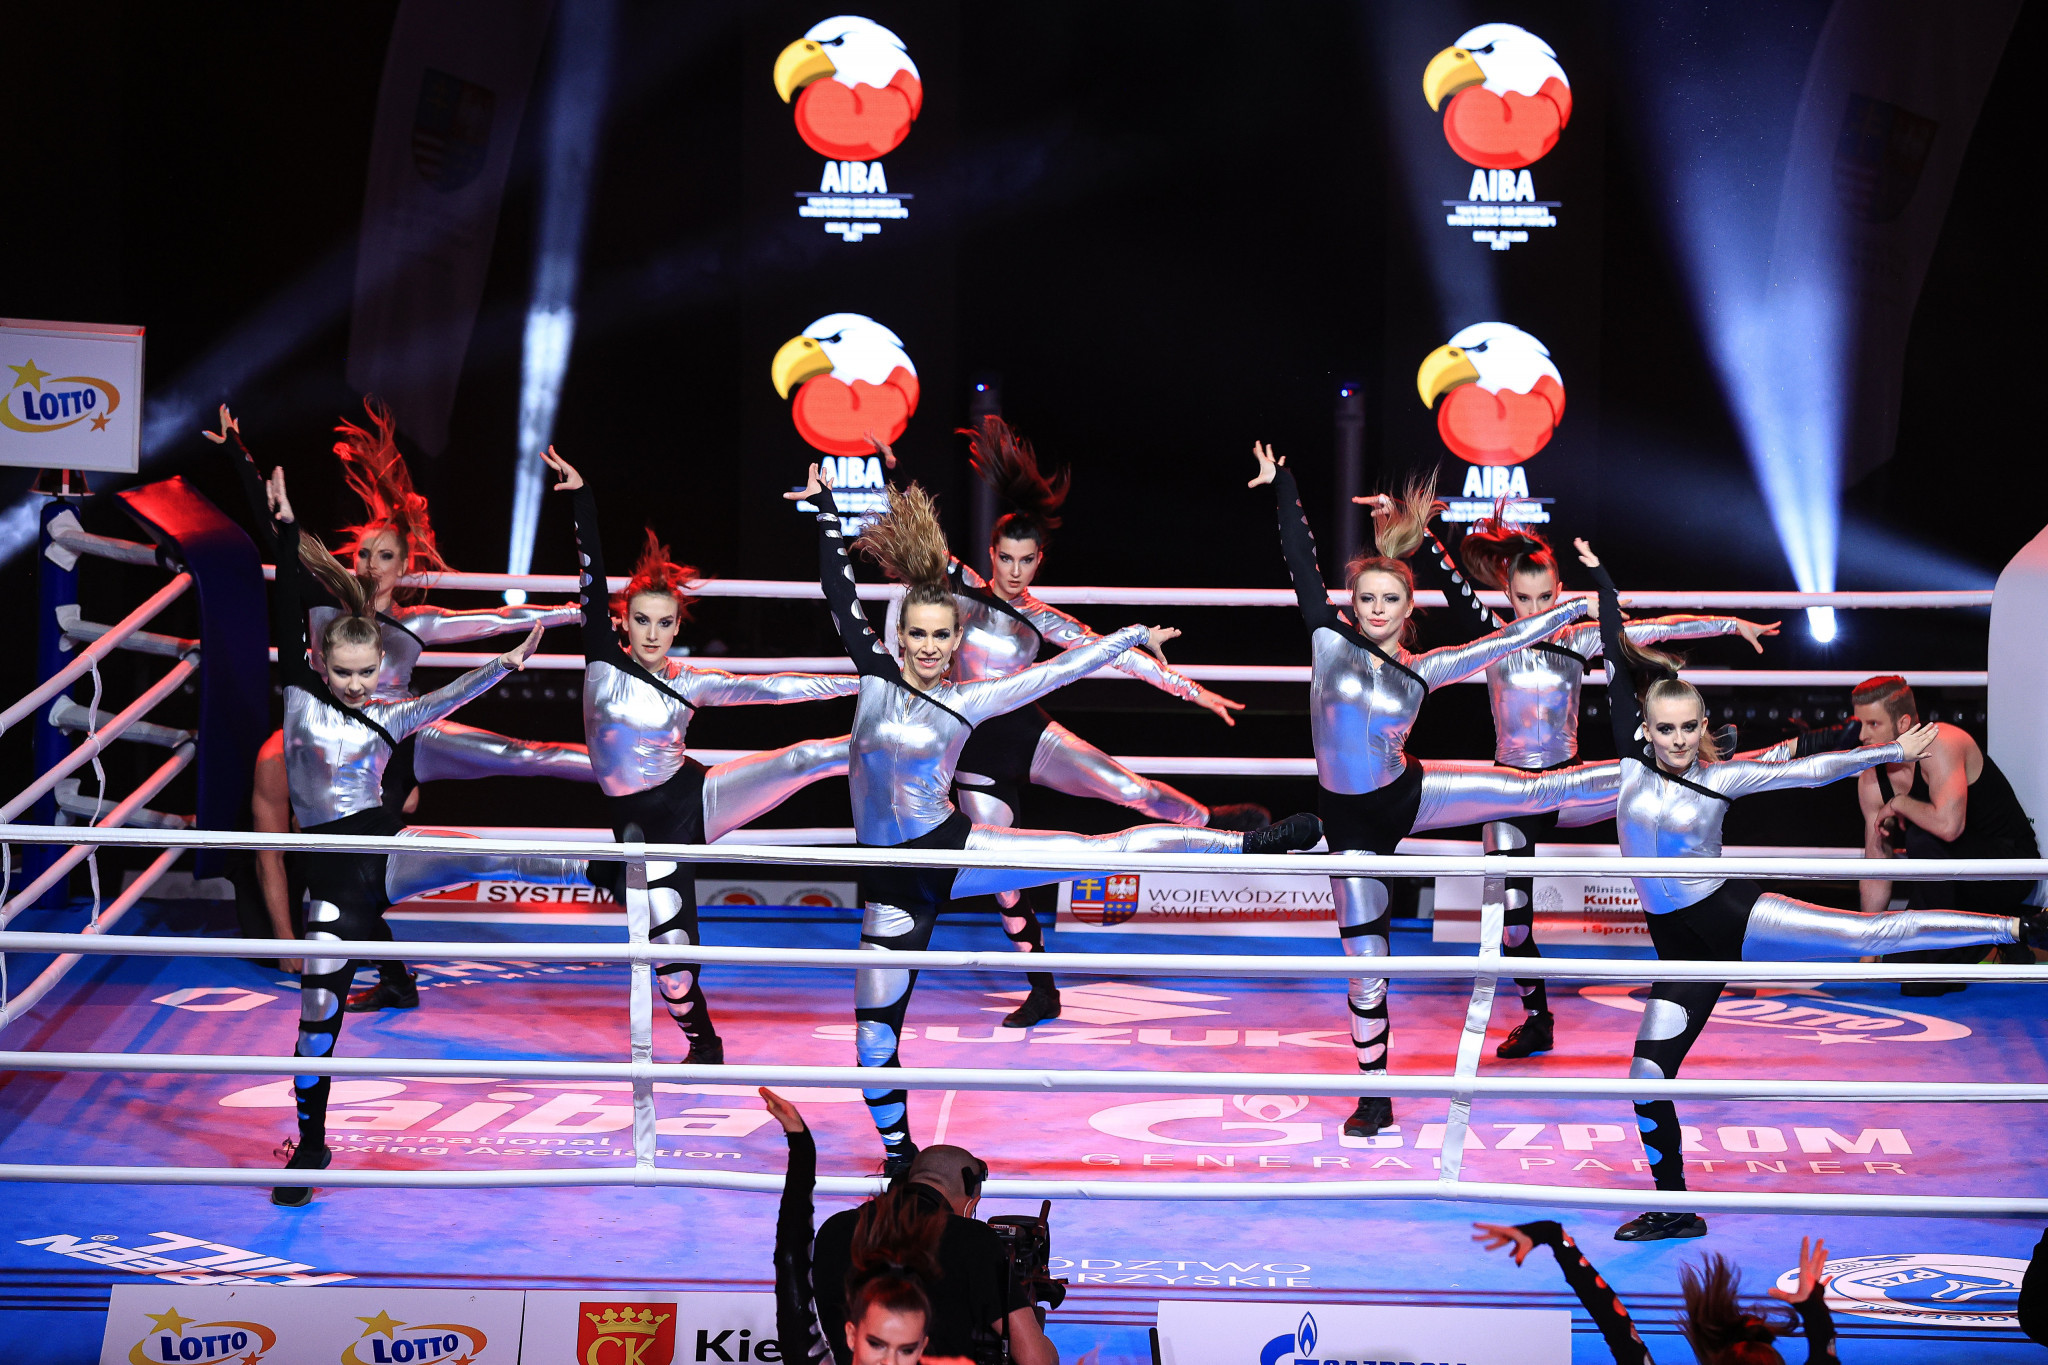 A dance display took place in the ring before the fights took place in Kielce ©AIBA